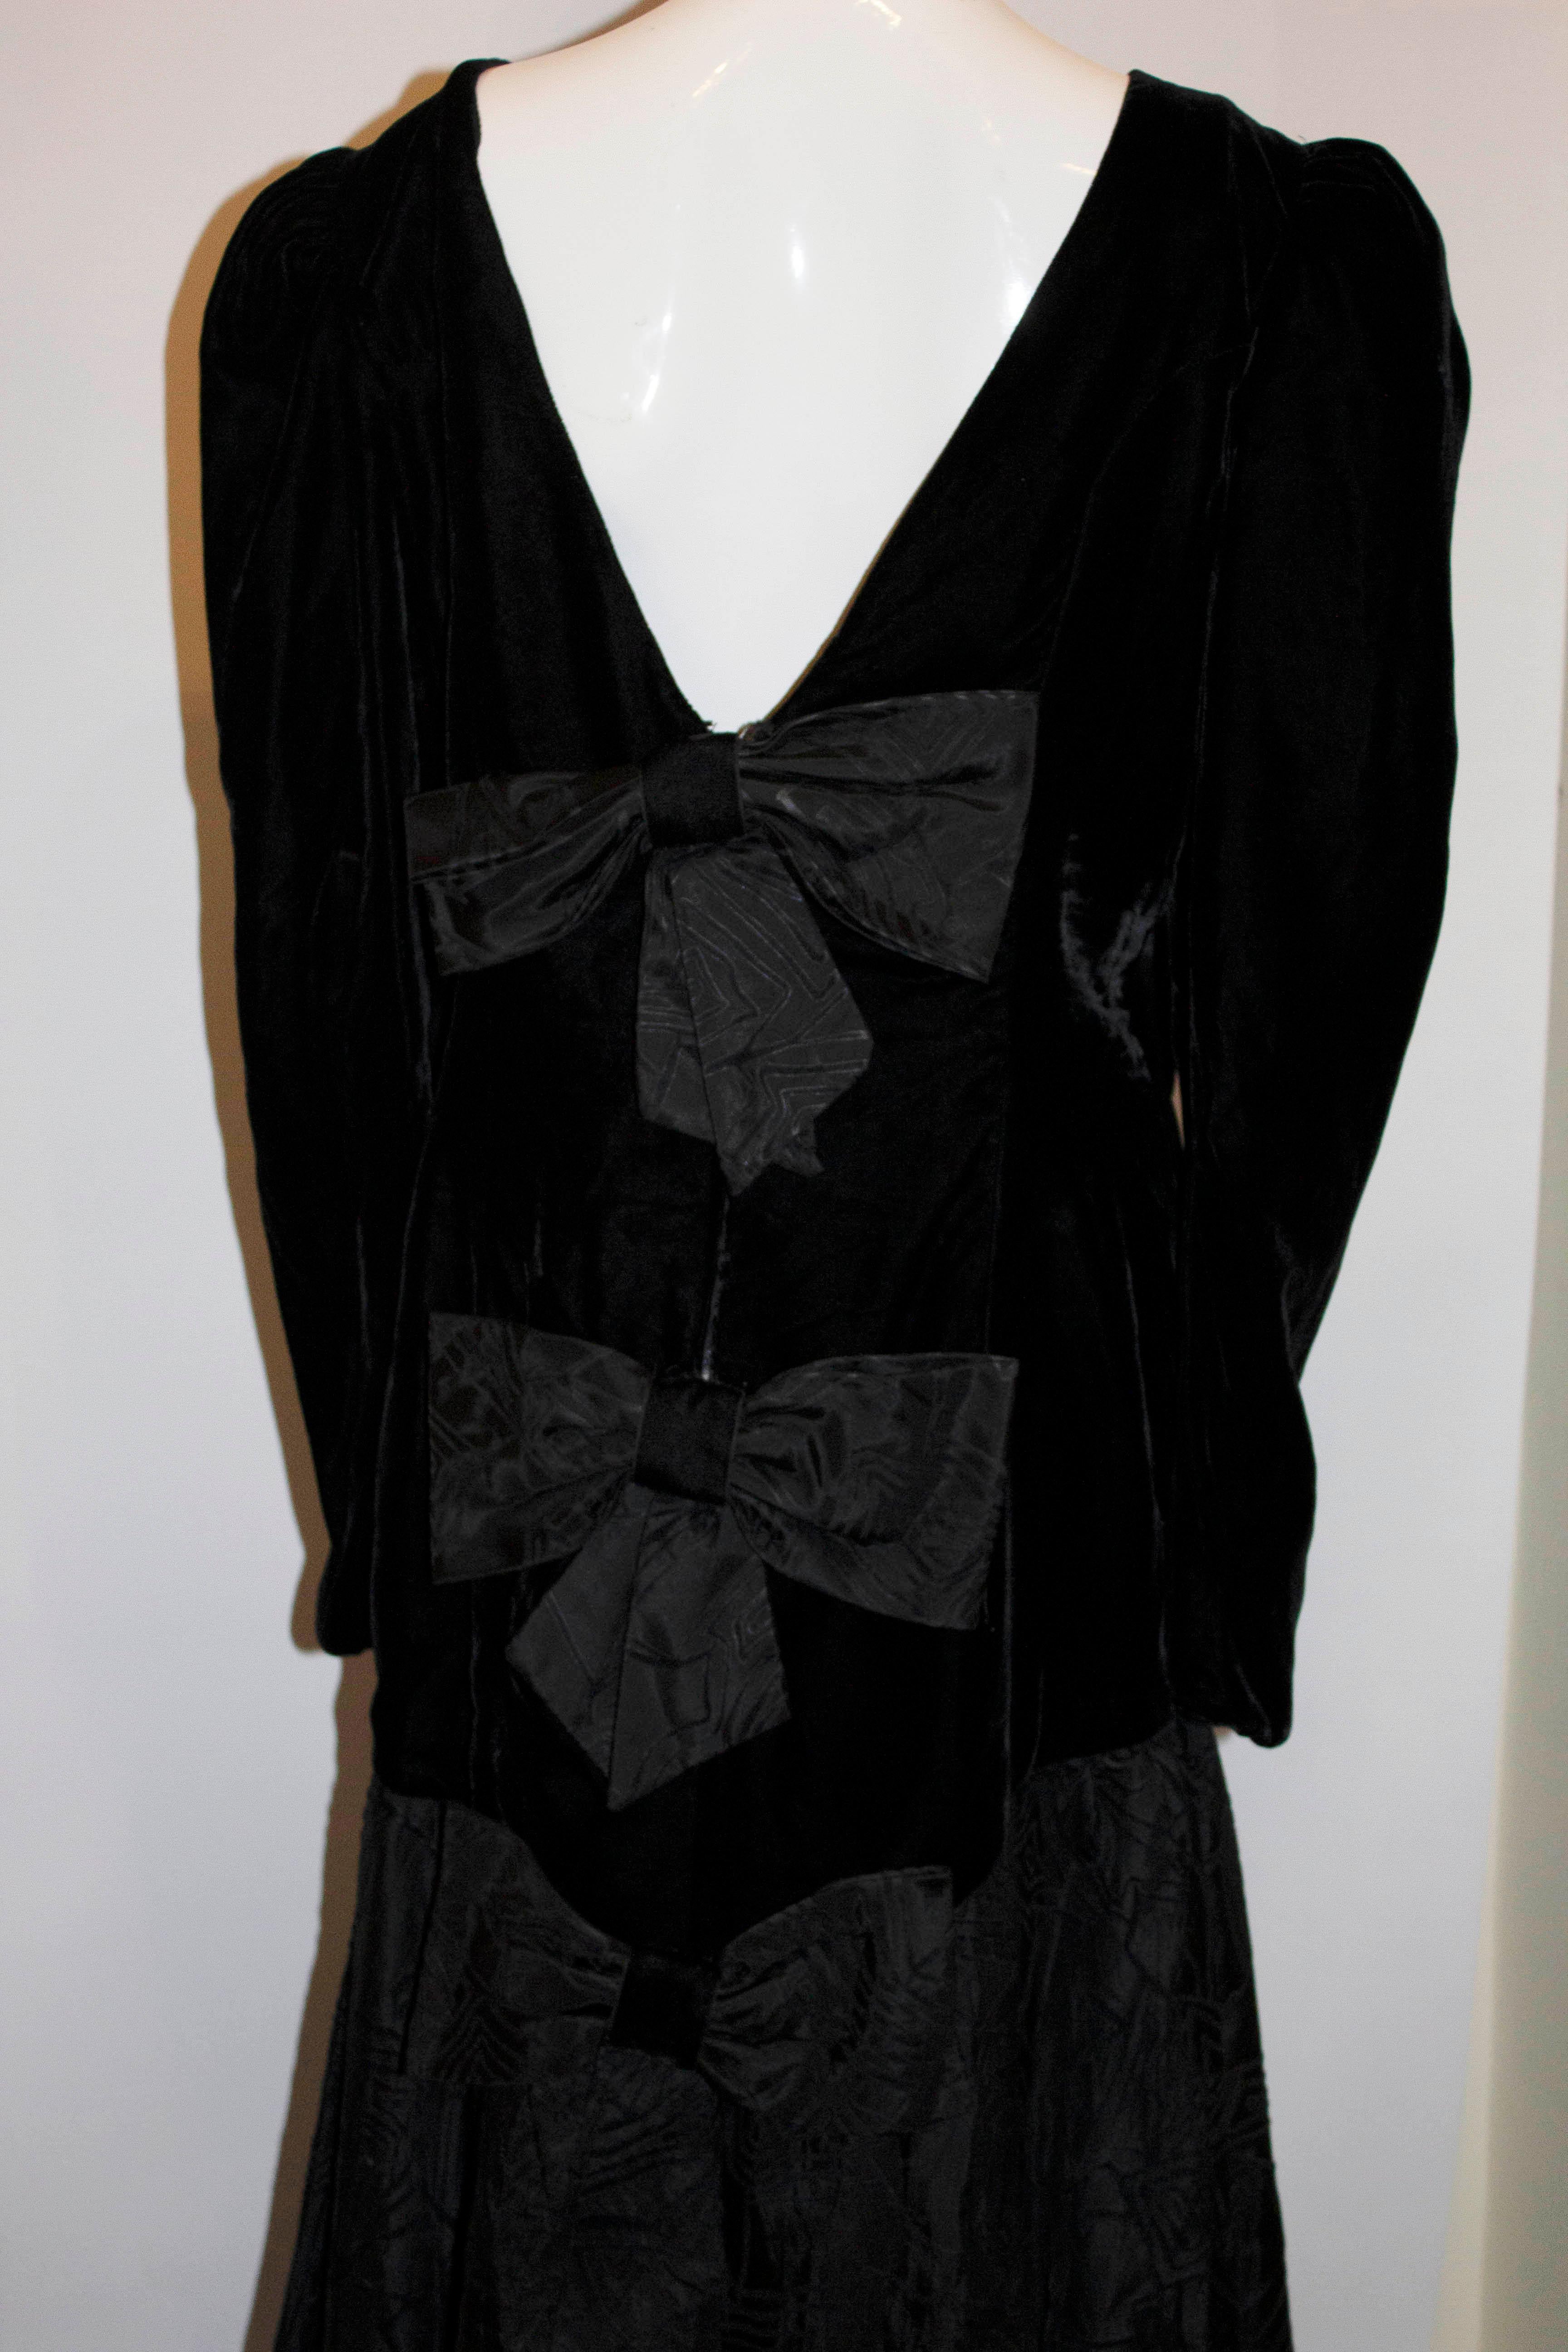 A wonderful statement evening gown form the 1980s. The dress is in black with bow detail on the front and back, and a taffetta skirt with net underneath. 
Measurements : Bust 38'', length 53''

